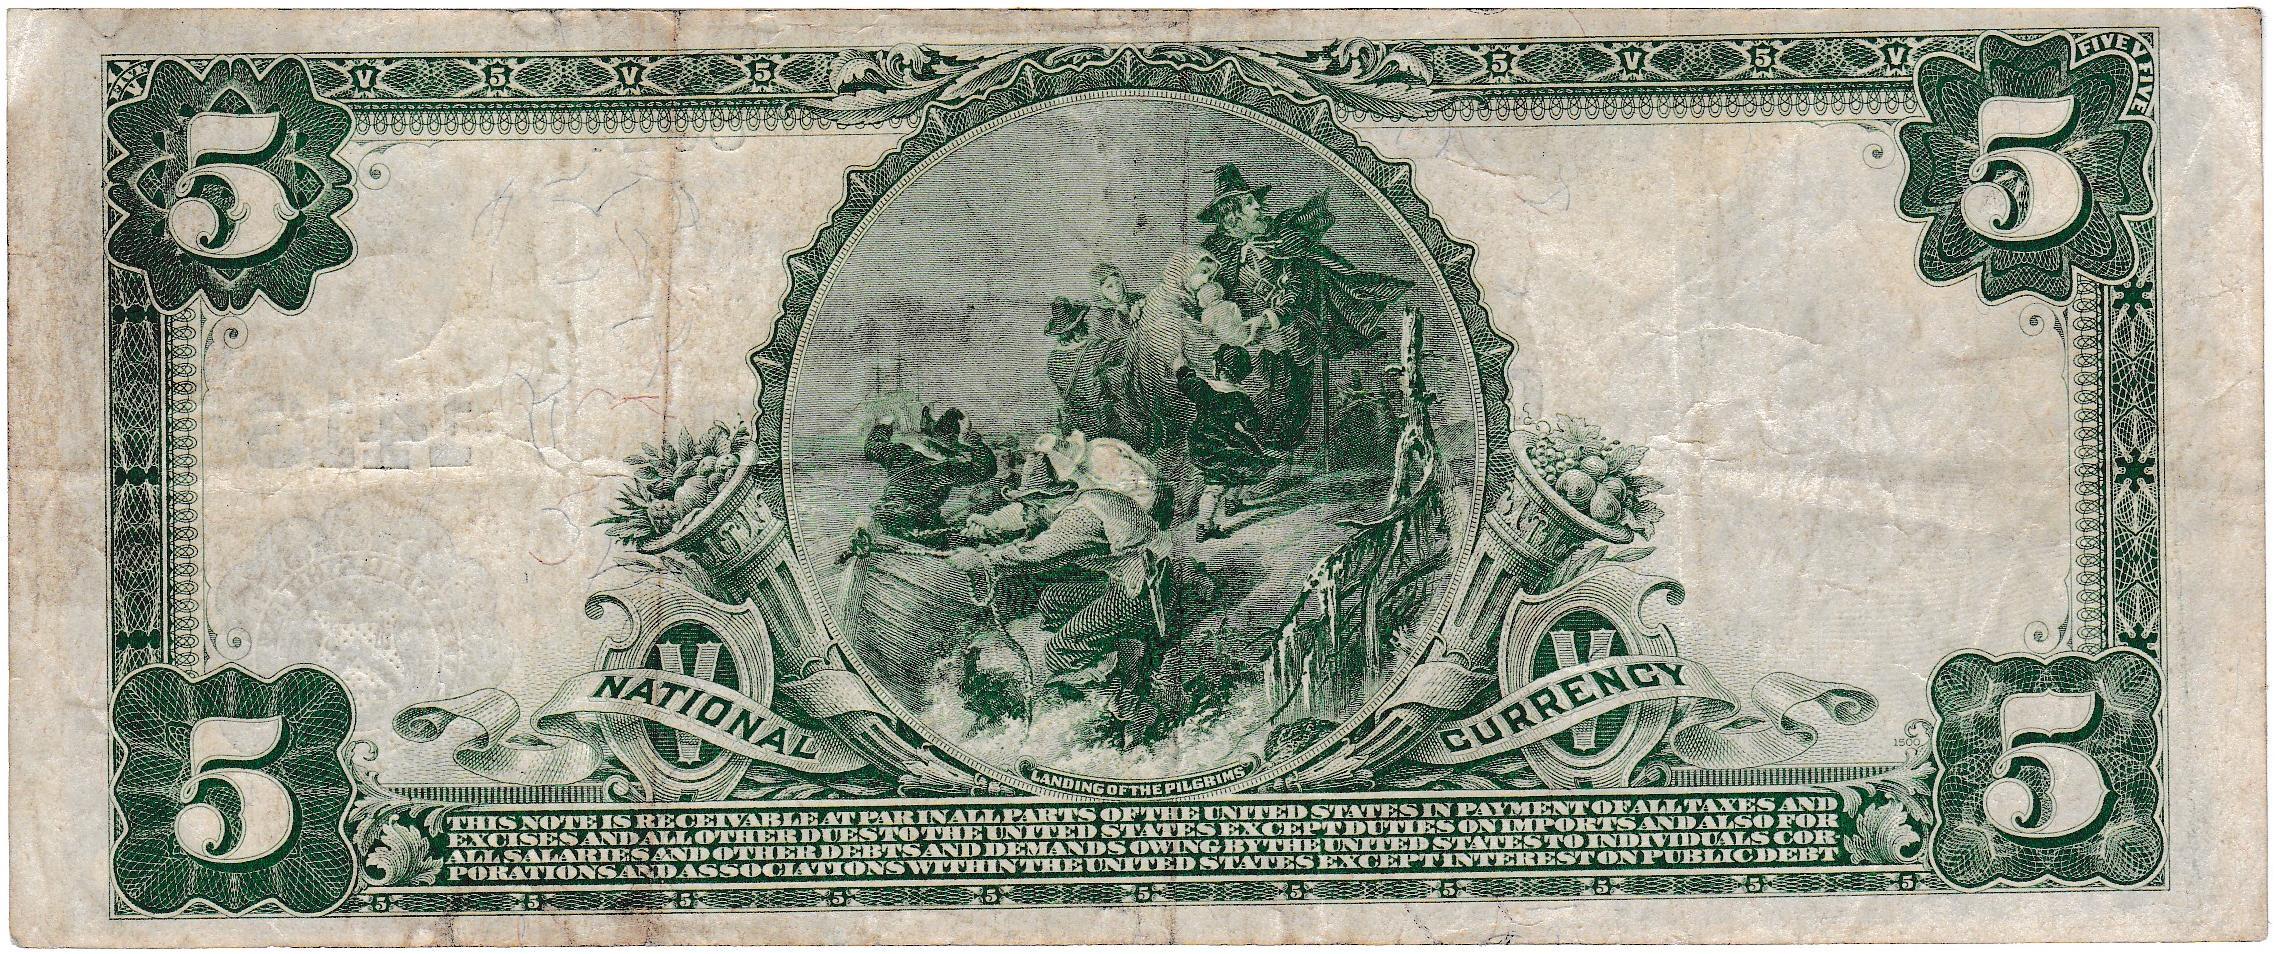 1902 U.S. large size $5 First National Bank of Baltimore national currency banknote